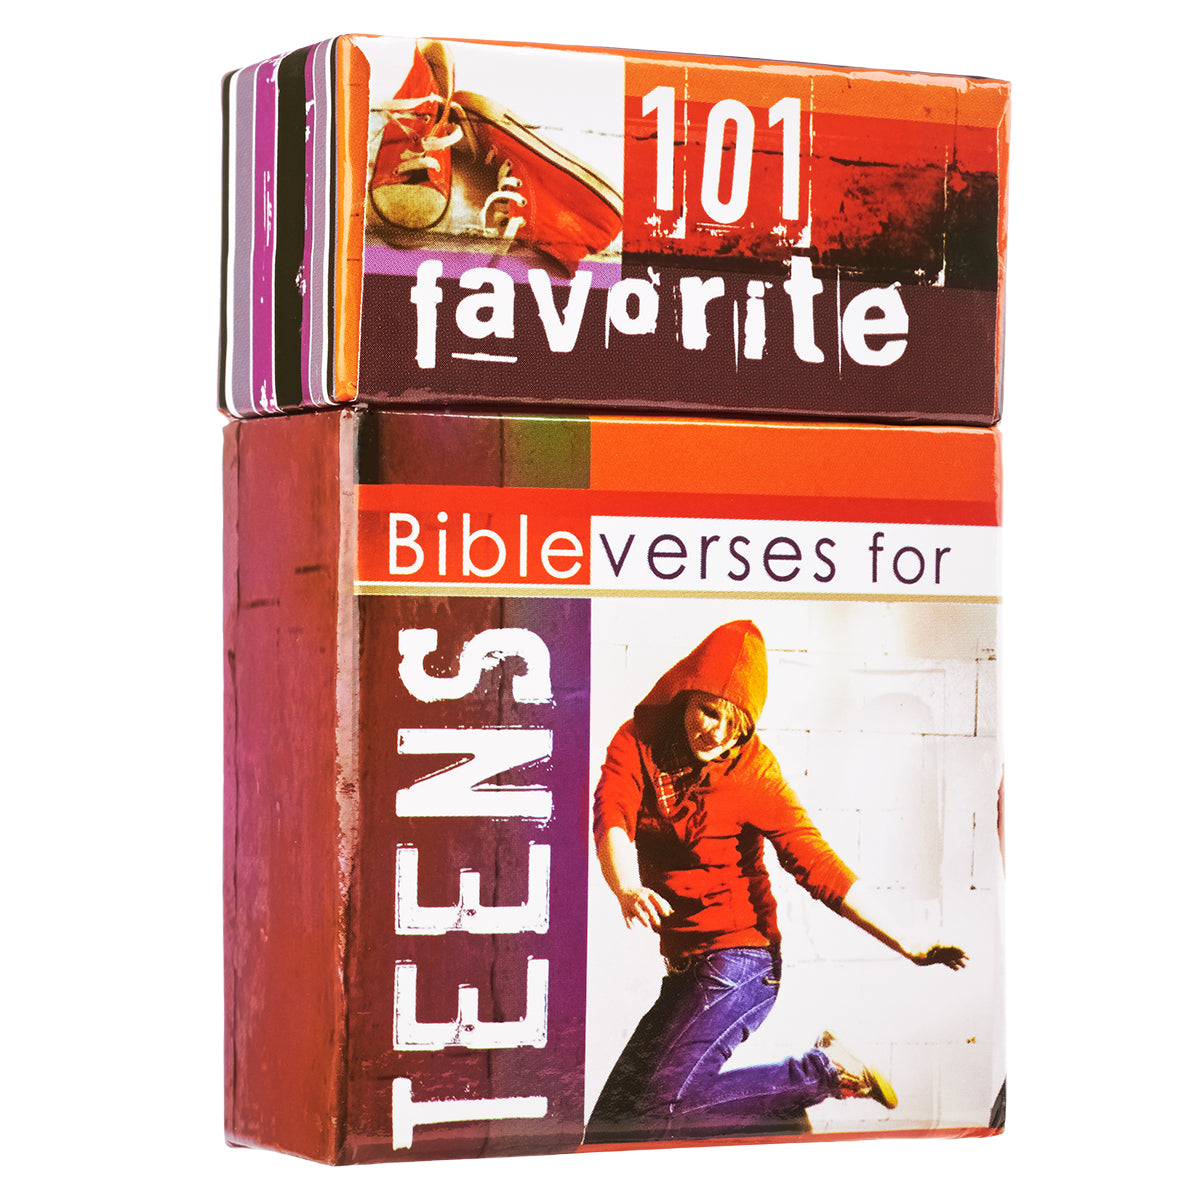 Image of 101 Favorite Bible Verses for Teens Box of Blessings other